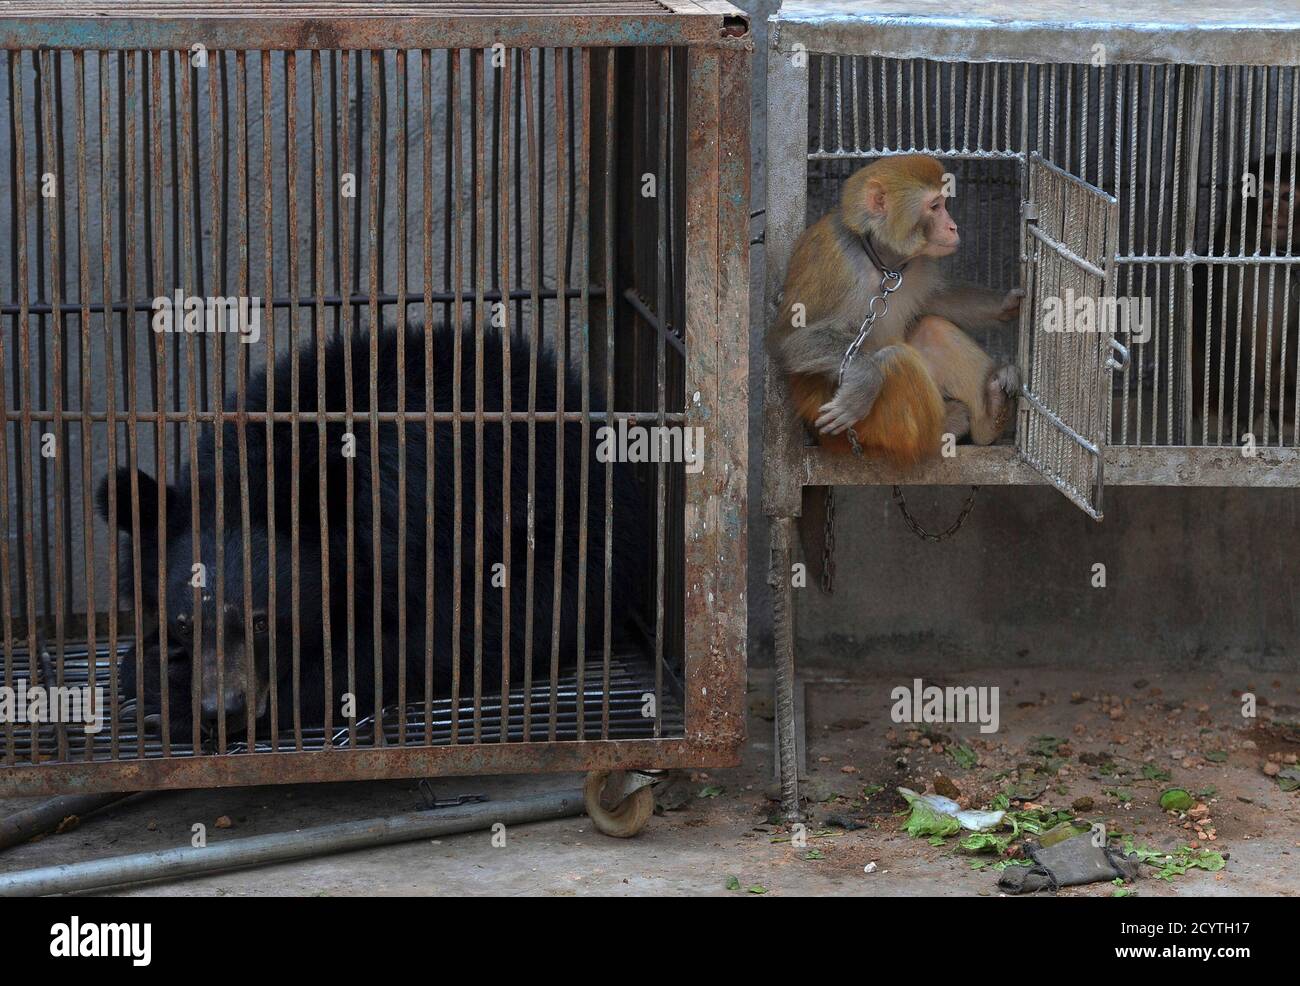 A black bear and macaques are seen inside cages in a village of Suzhou,  Anhui province October 30, 2012. Thousands of animals are raised and  trained by over 300 circus groups in